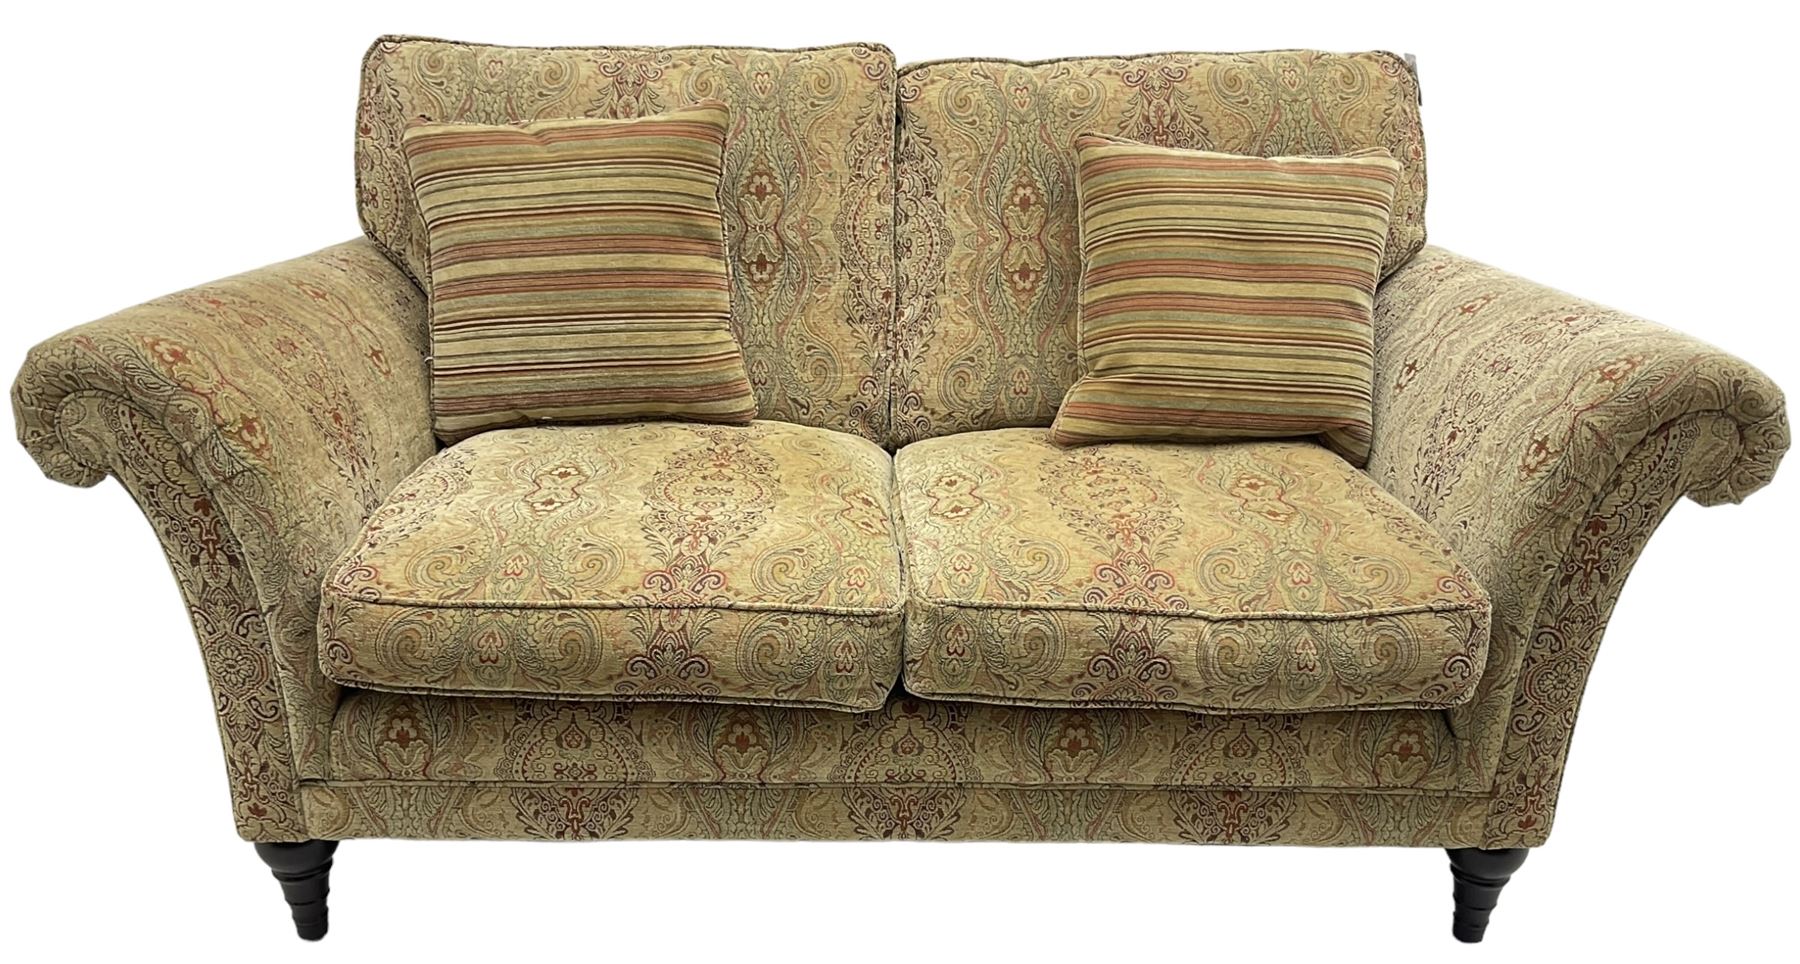 Parker Knoll - 'Burghley' two-seat sofa - Image 2 of 6